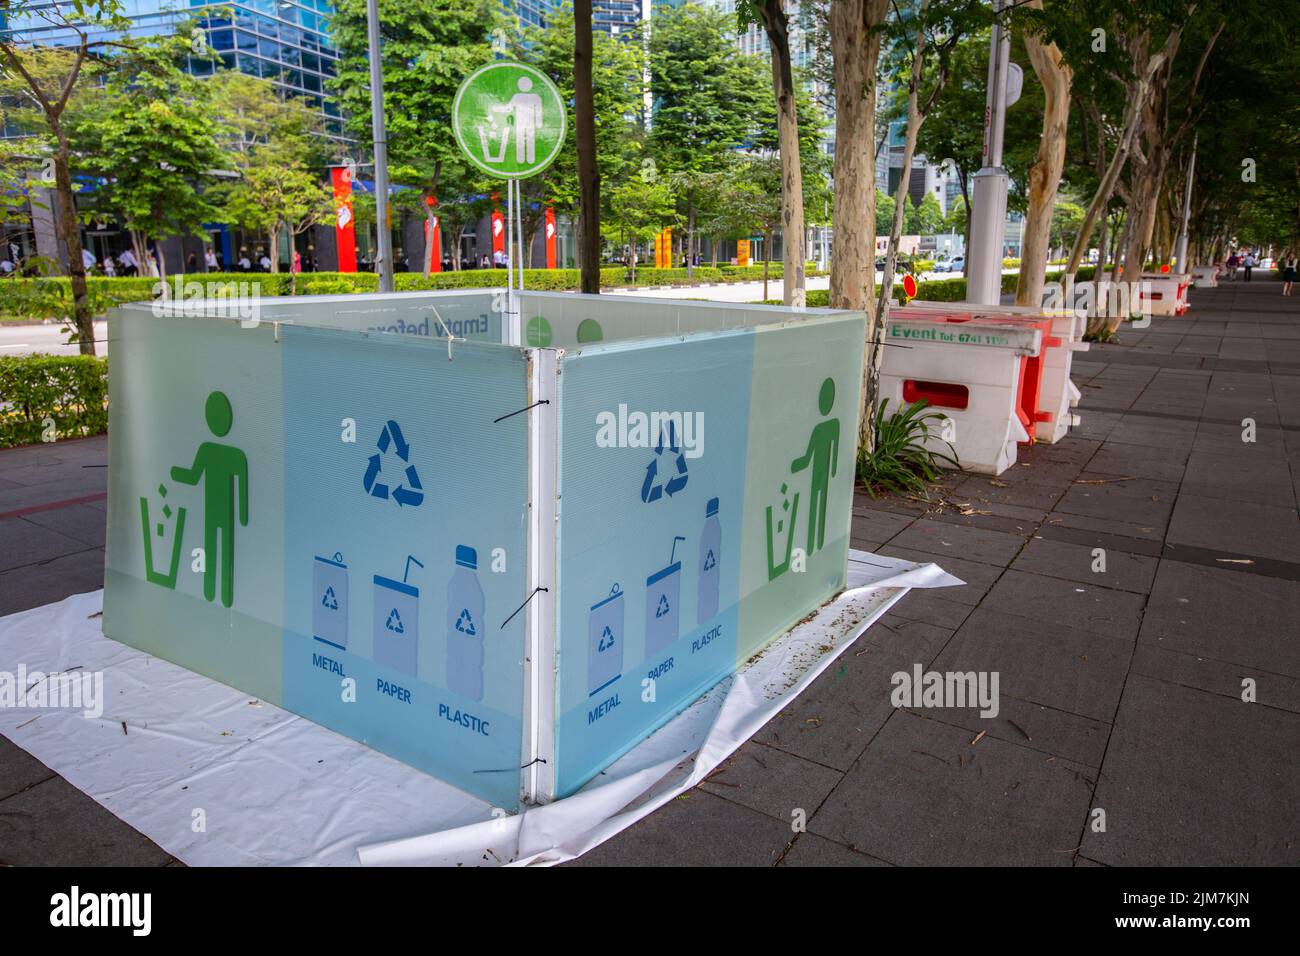 A huge bin collection point in public venue for people to recycle plastic bottles, paper cups or other recyclable material. Protect our earth. Stock Photo